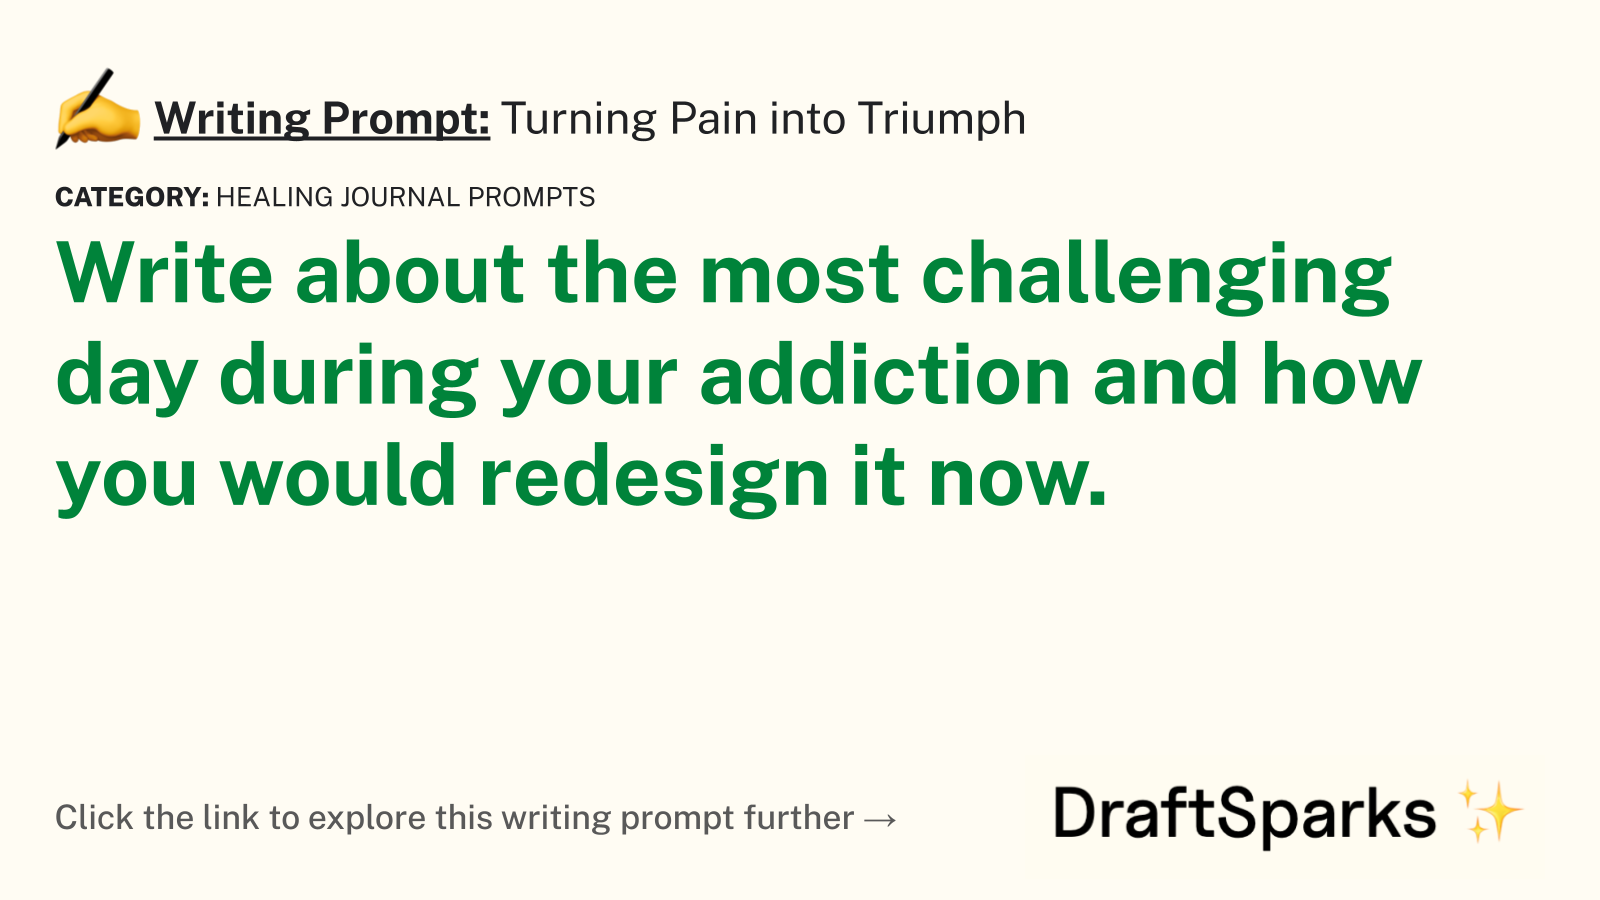 Turning Pain into Triumph